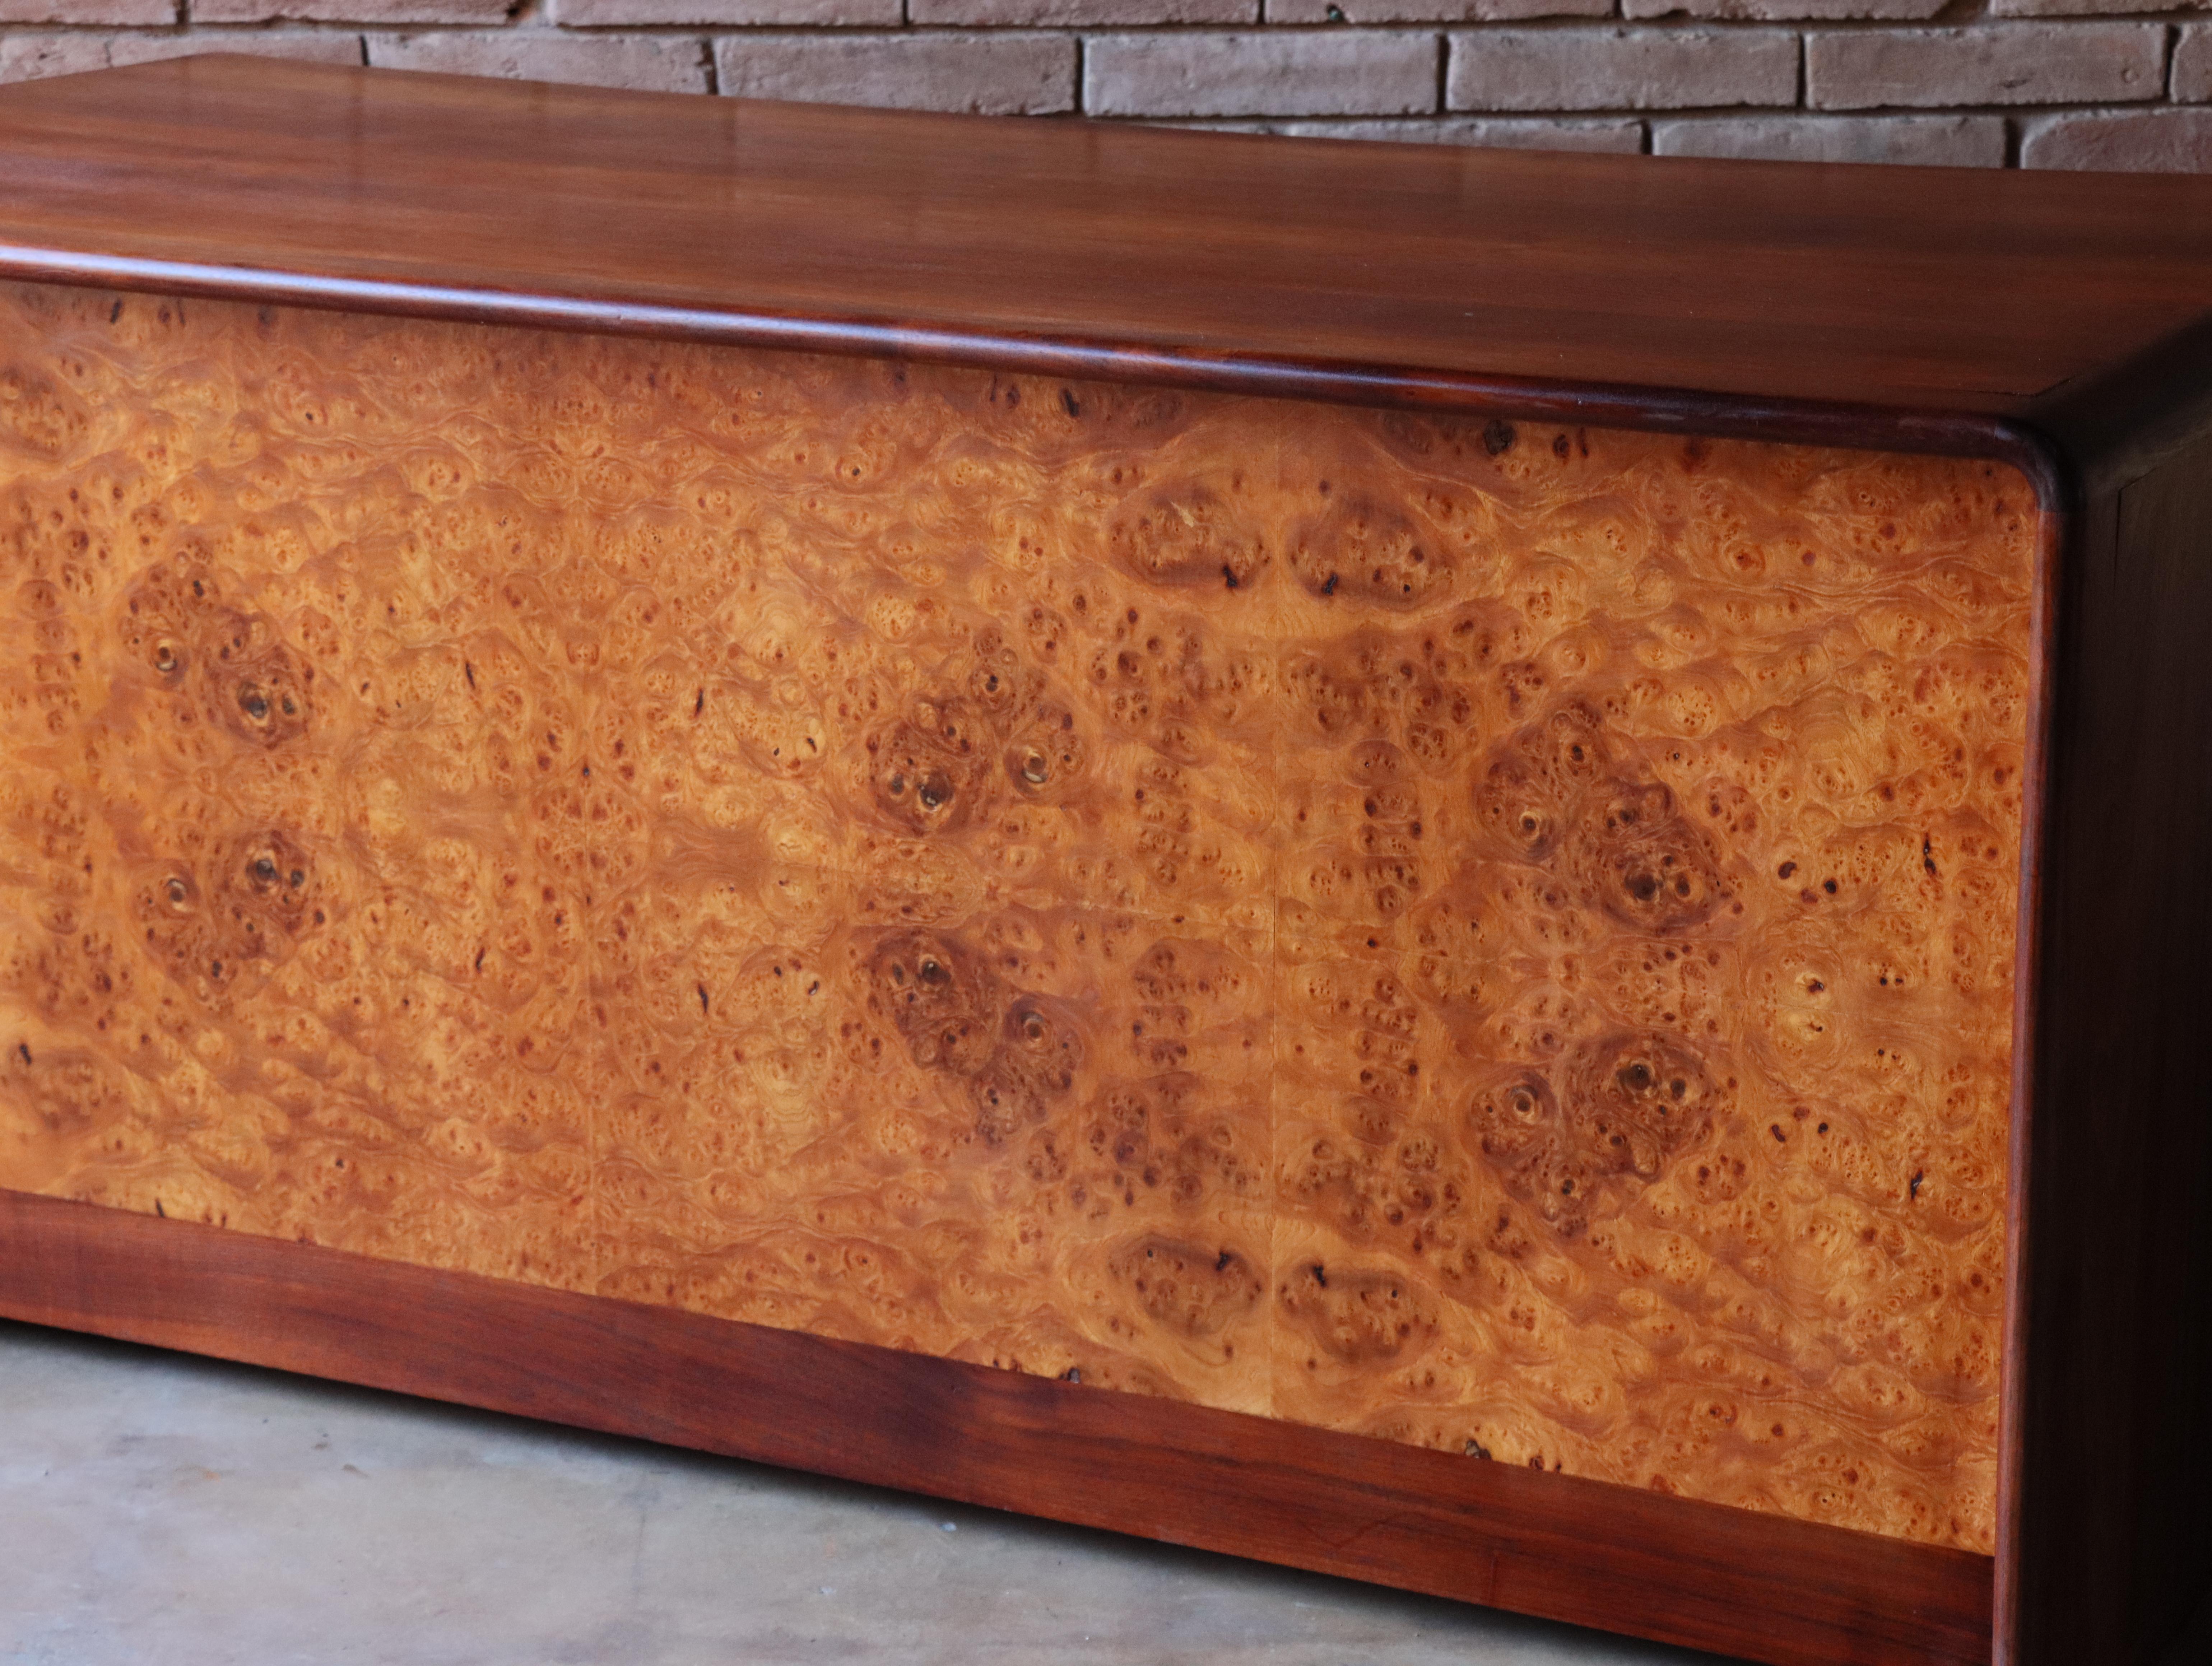 Hand-Crafted Solid Walnut and Burlwood Desk by Lou Hodges, California Design, 1970s For Sale